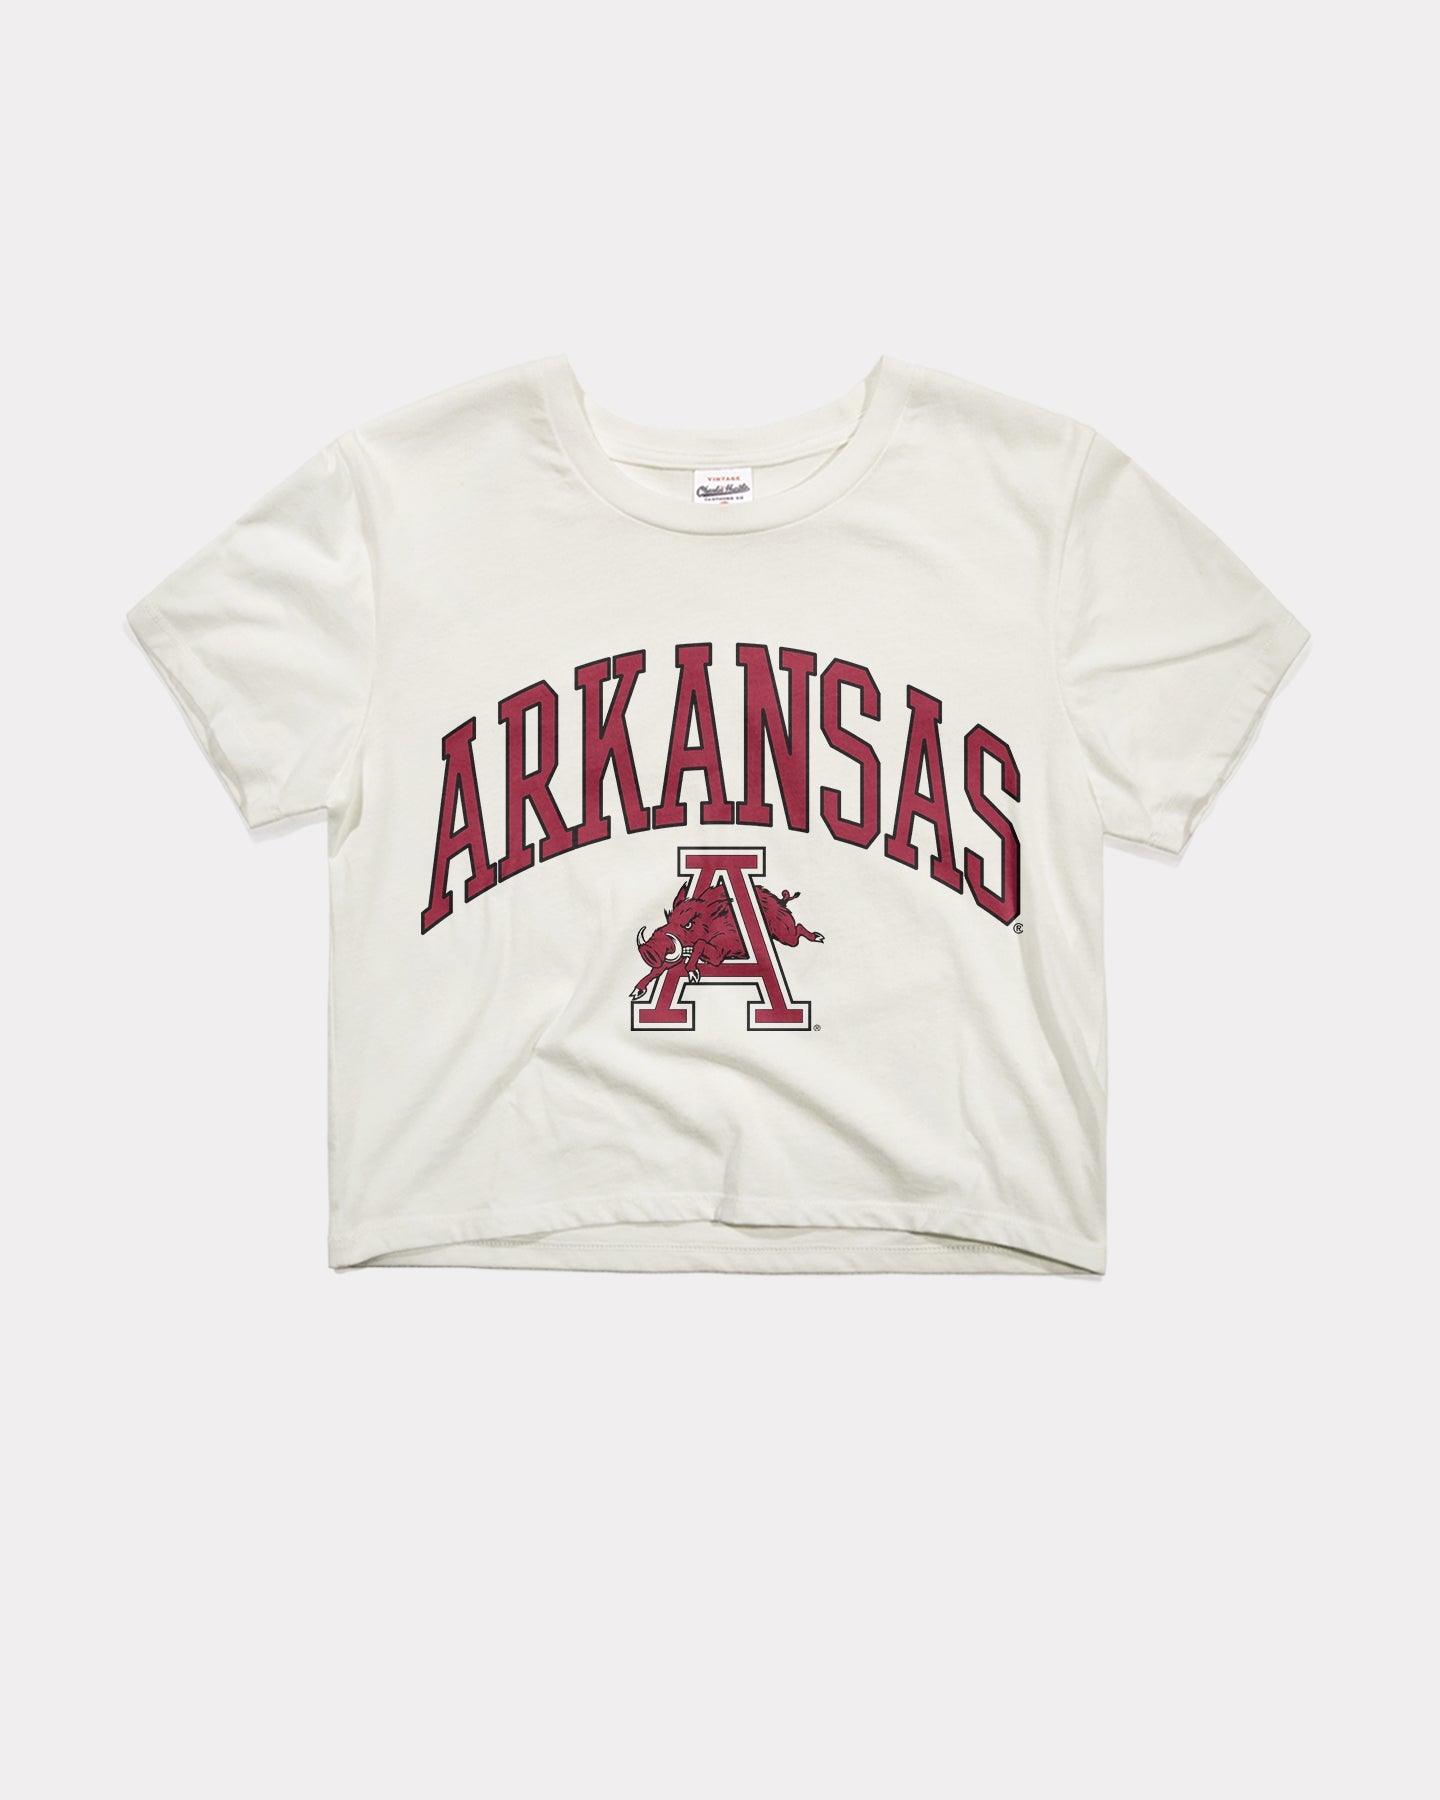 Braves Crop Top White - $20 (42% Off Retail) - From SarahBeth